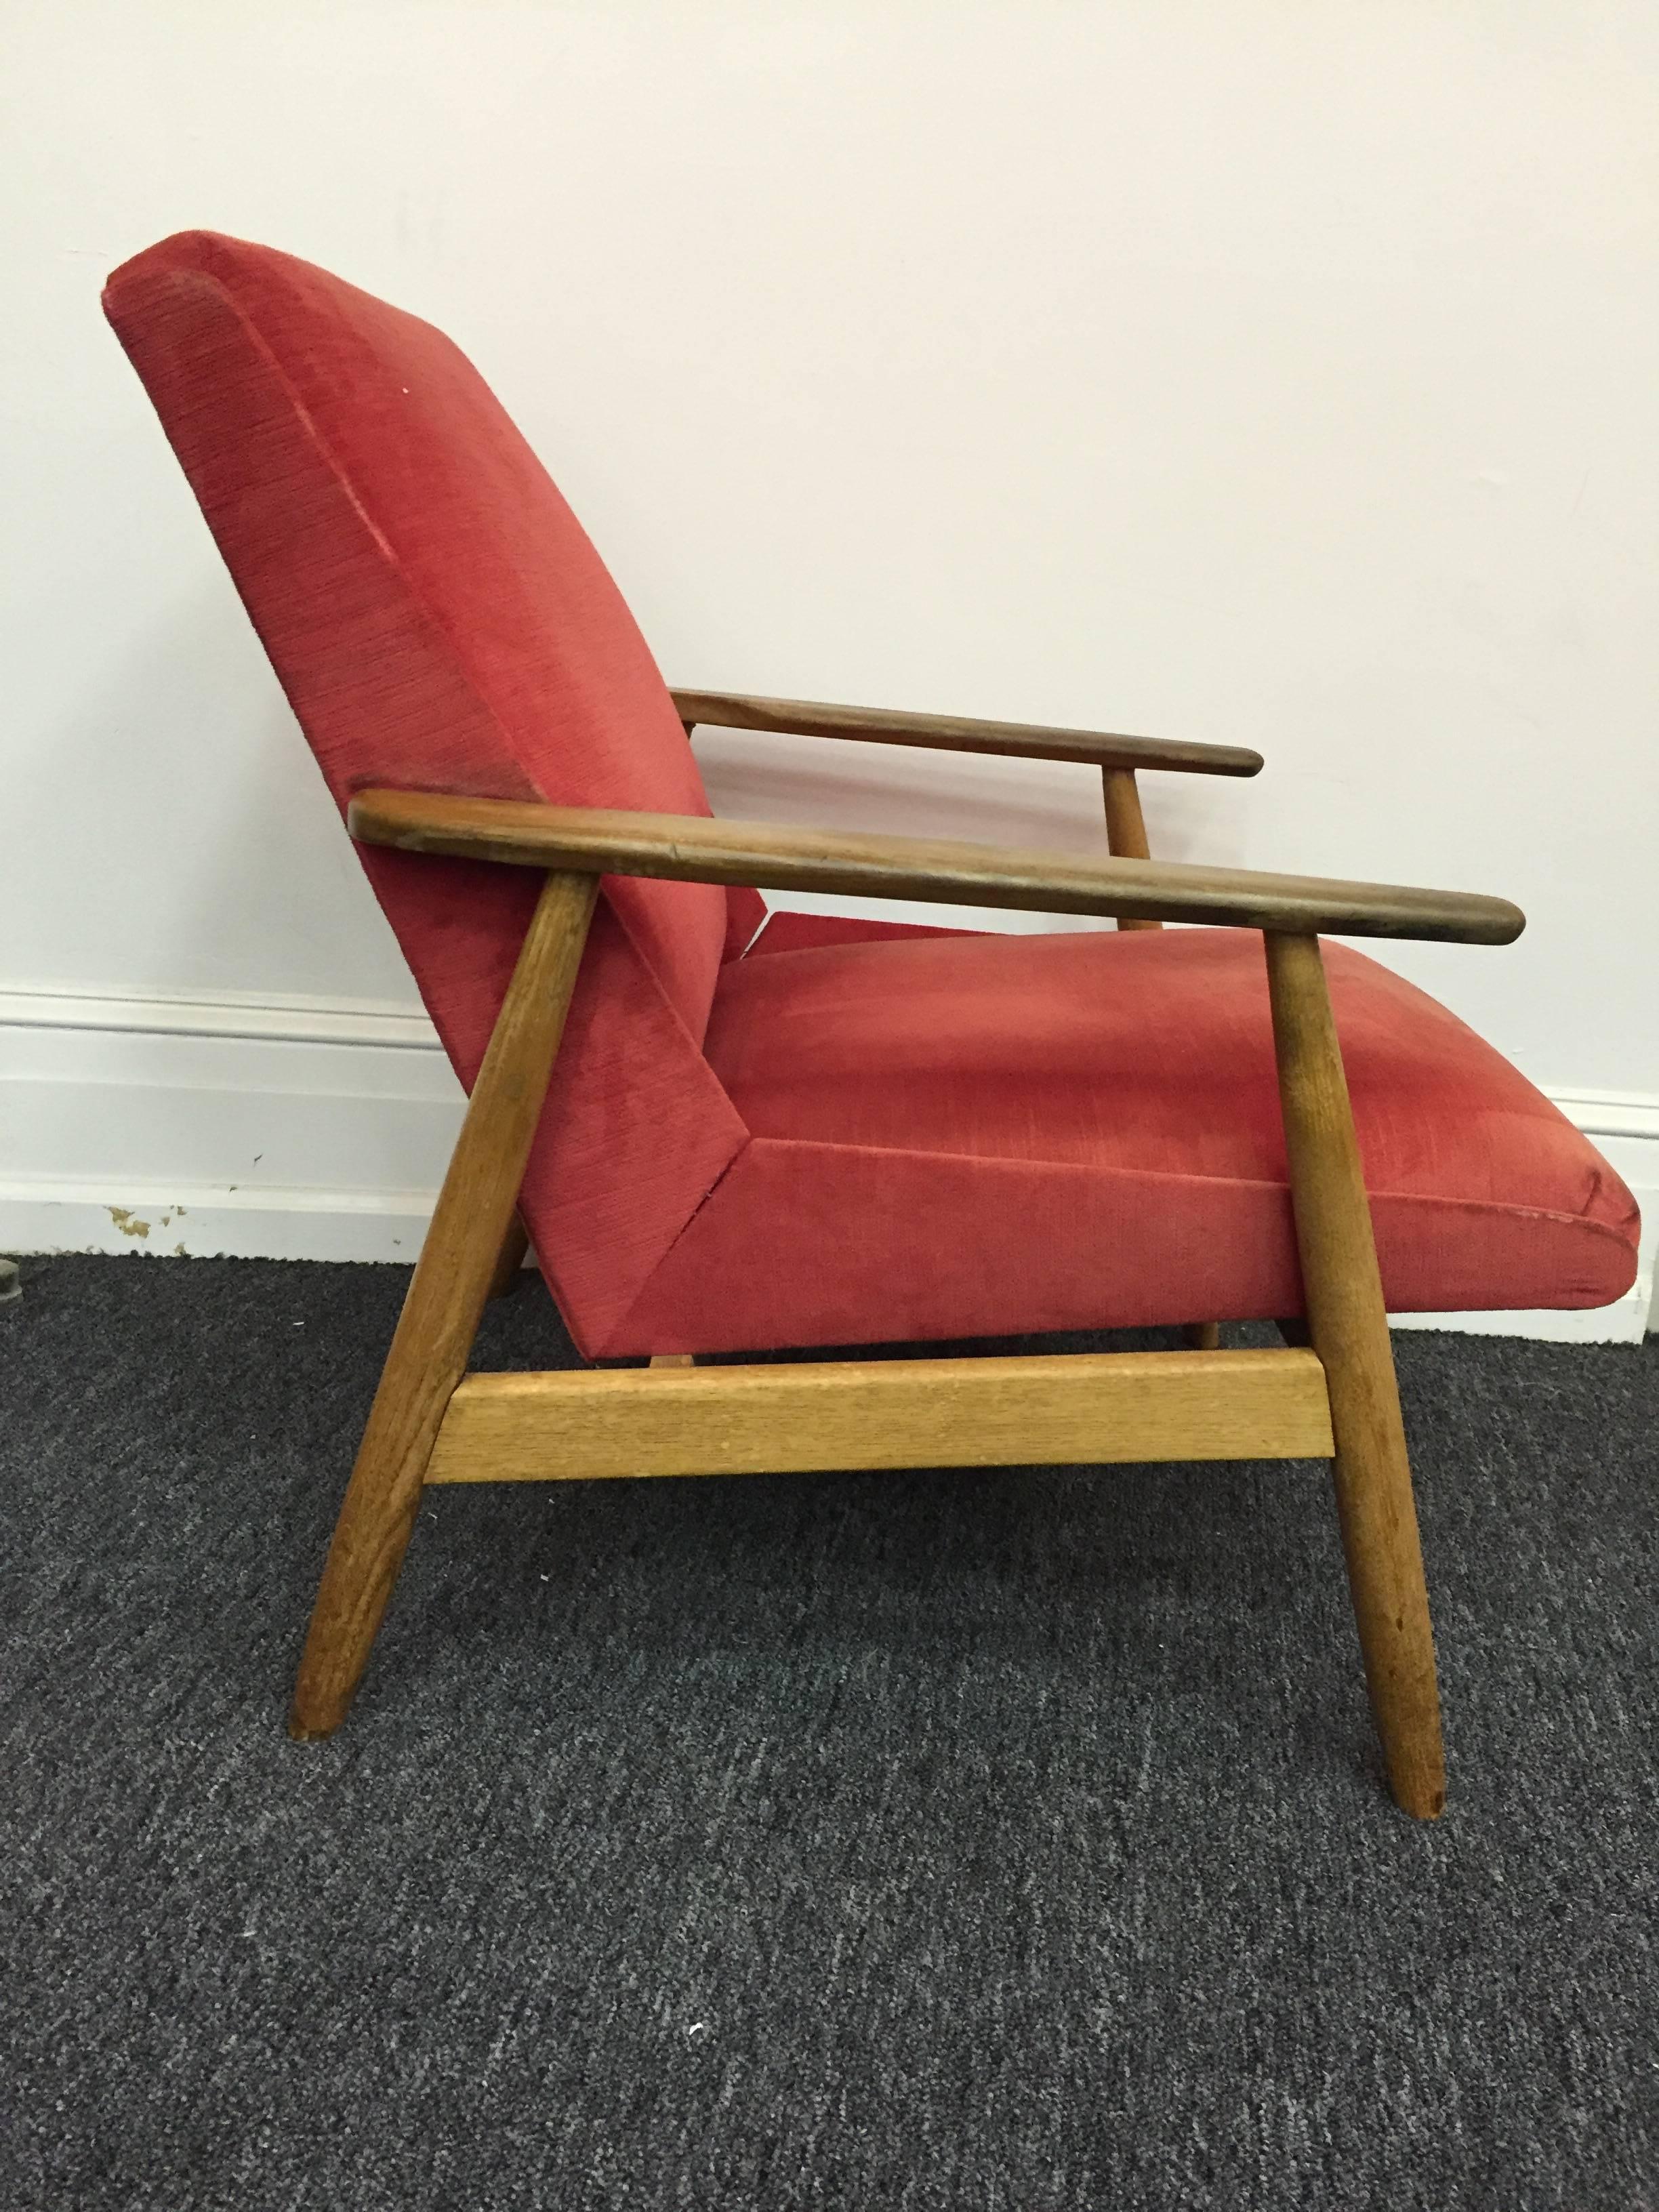 A pair of Scandinavian modern armchairs or lounge chairs in teak with original red upholstery, circa 1960.